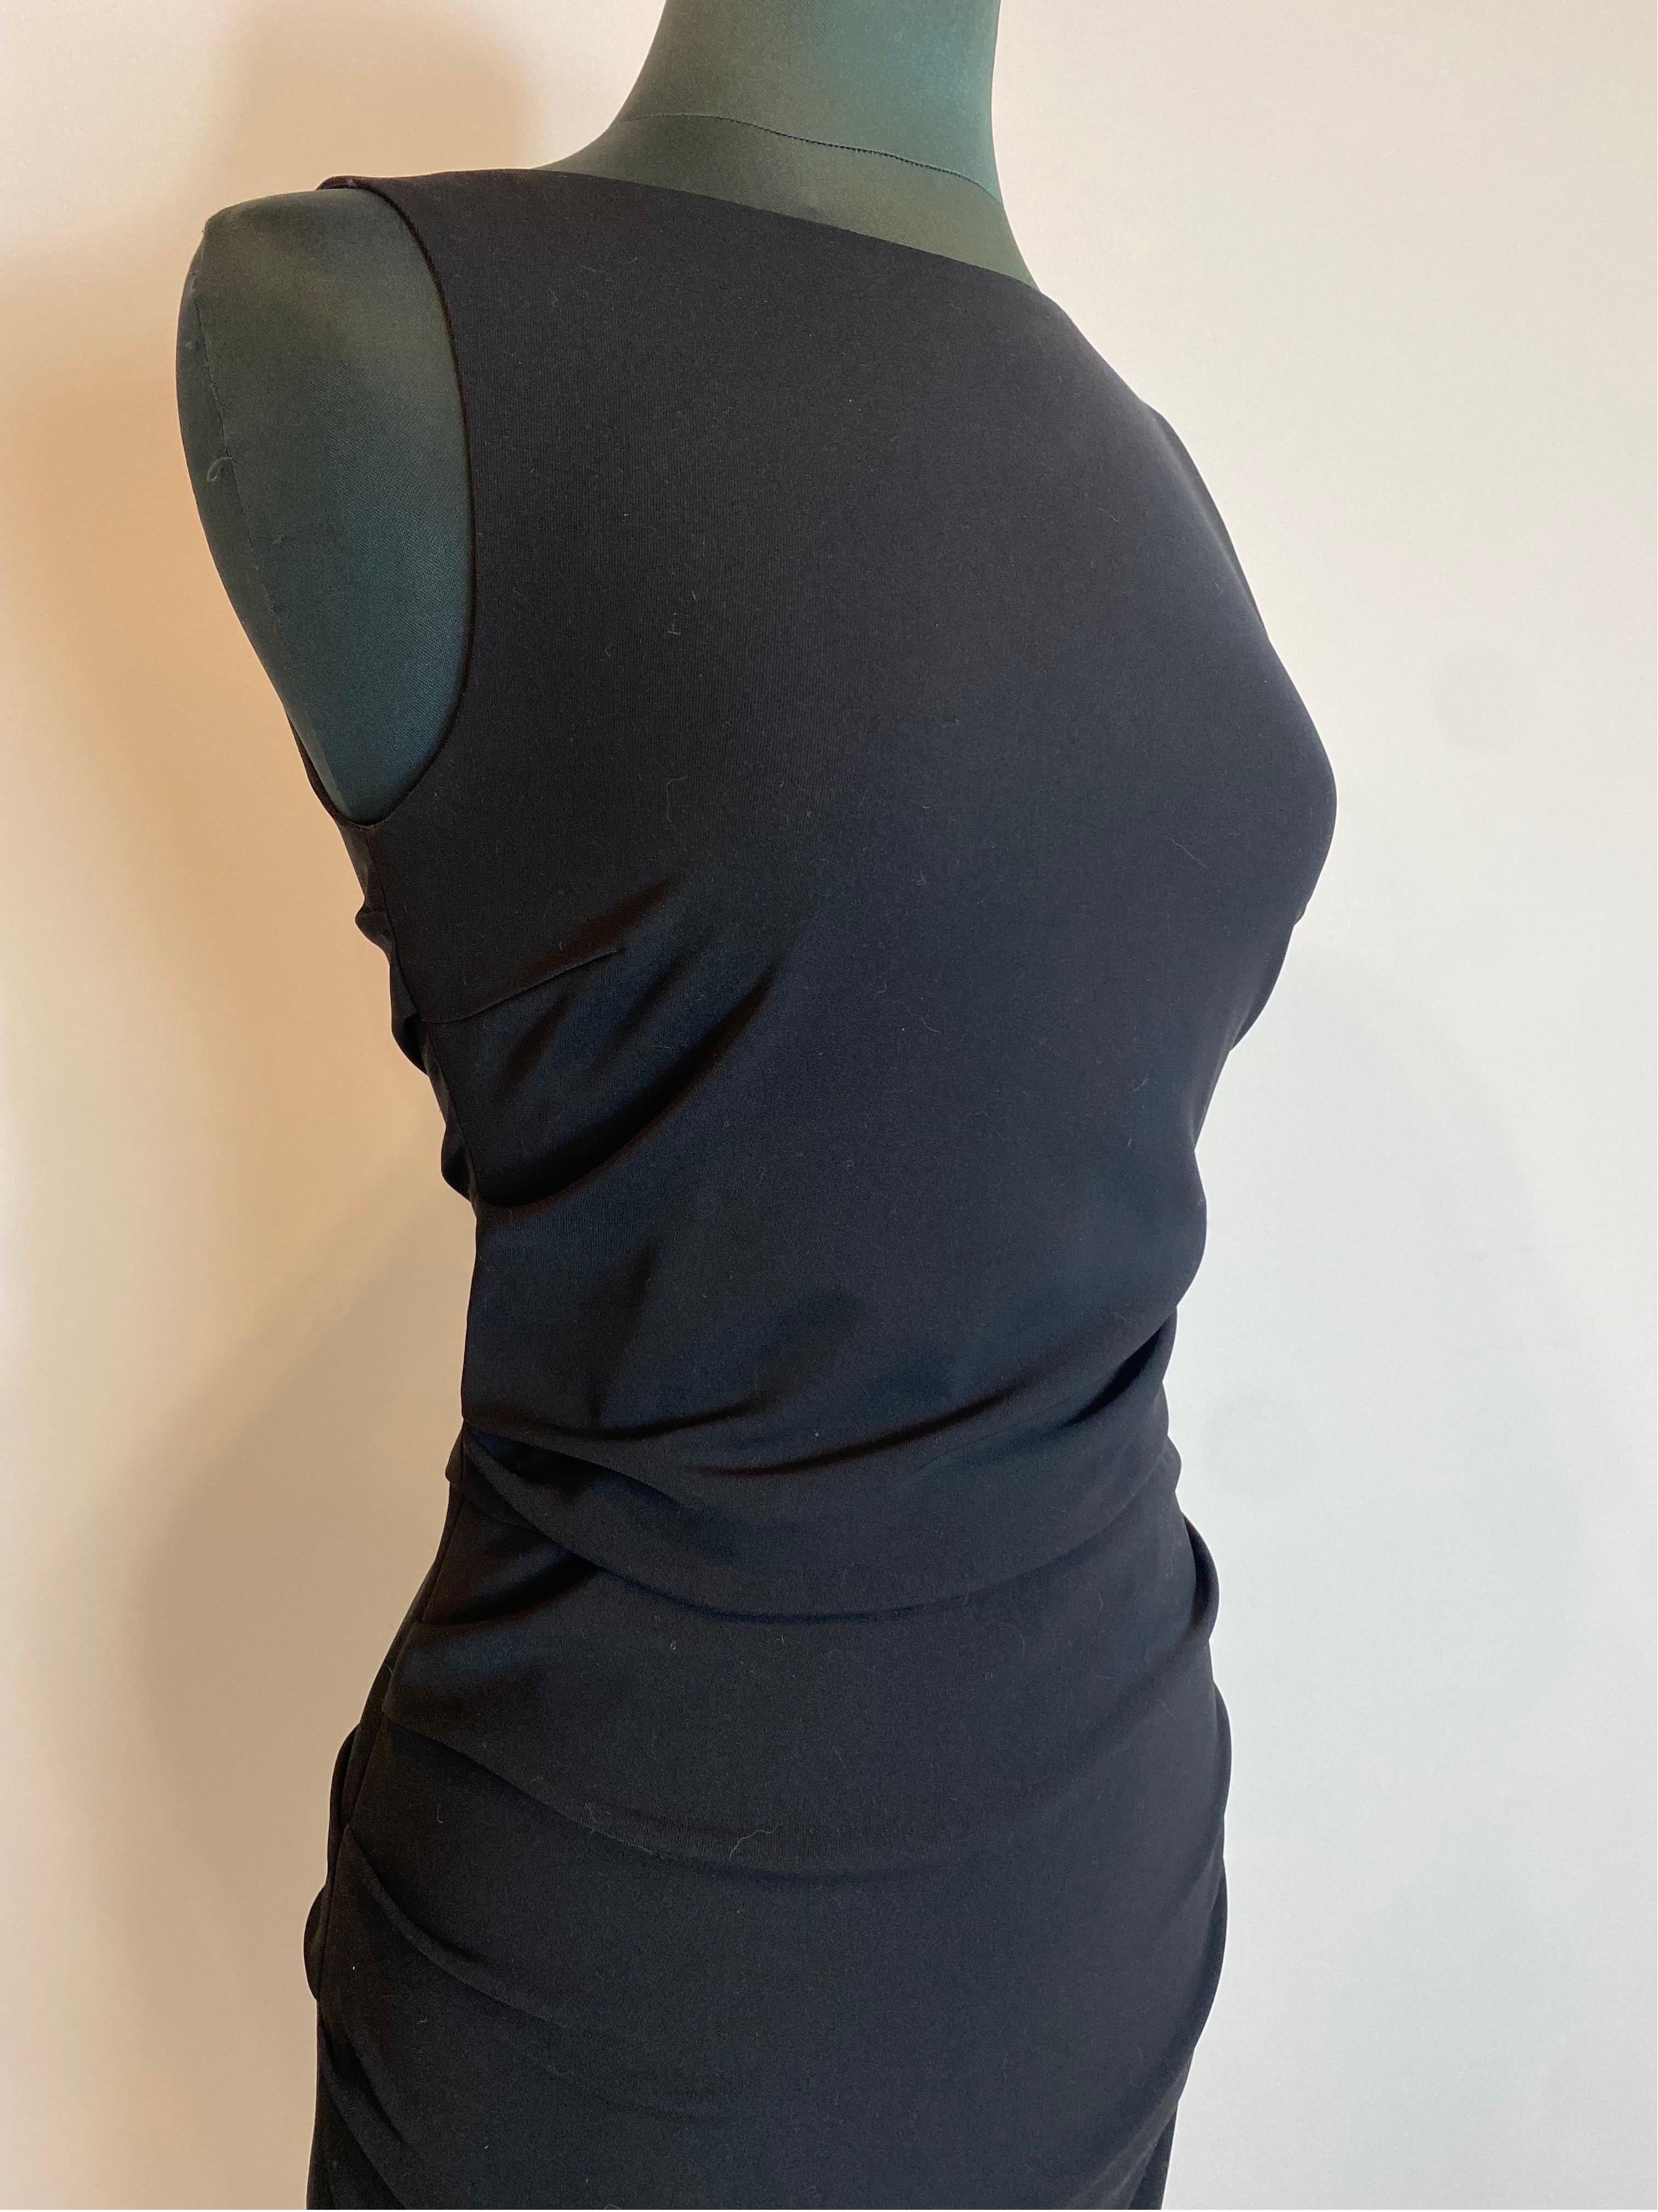 Black Dolce & Gabbana sheath dress
Made of polyester. Nice effect with curls on the sides.
Invisible zip closure on the back.
Size 42.
Shoulders 33
Length 102
Breast 42
Bust 43
Hips 47
In very good condition, shows signs of normal use.